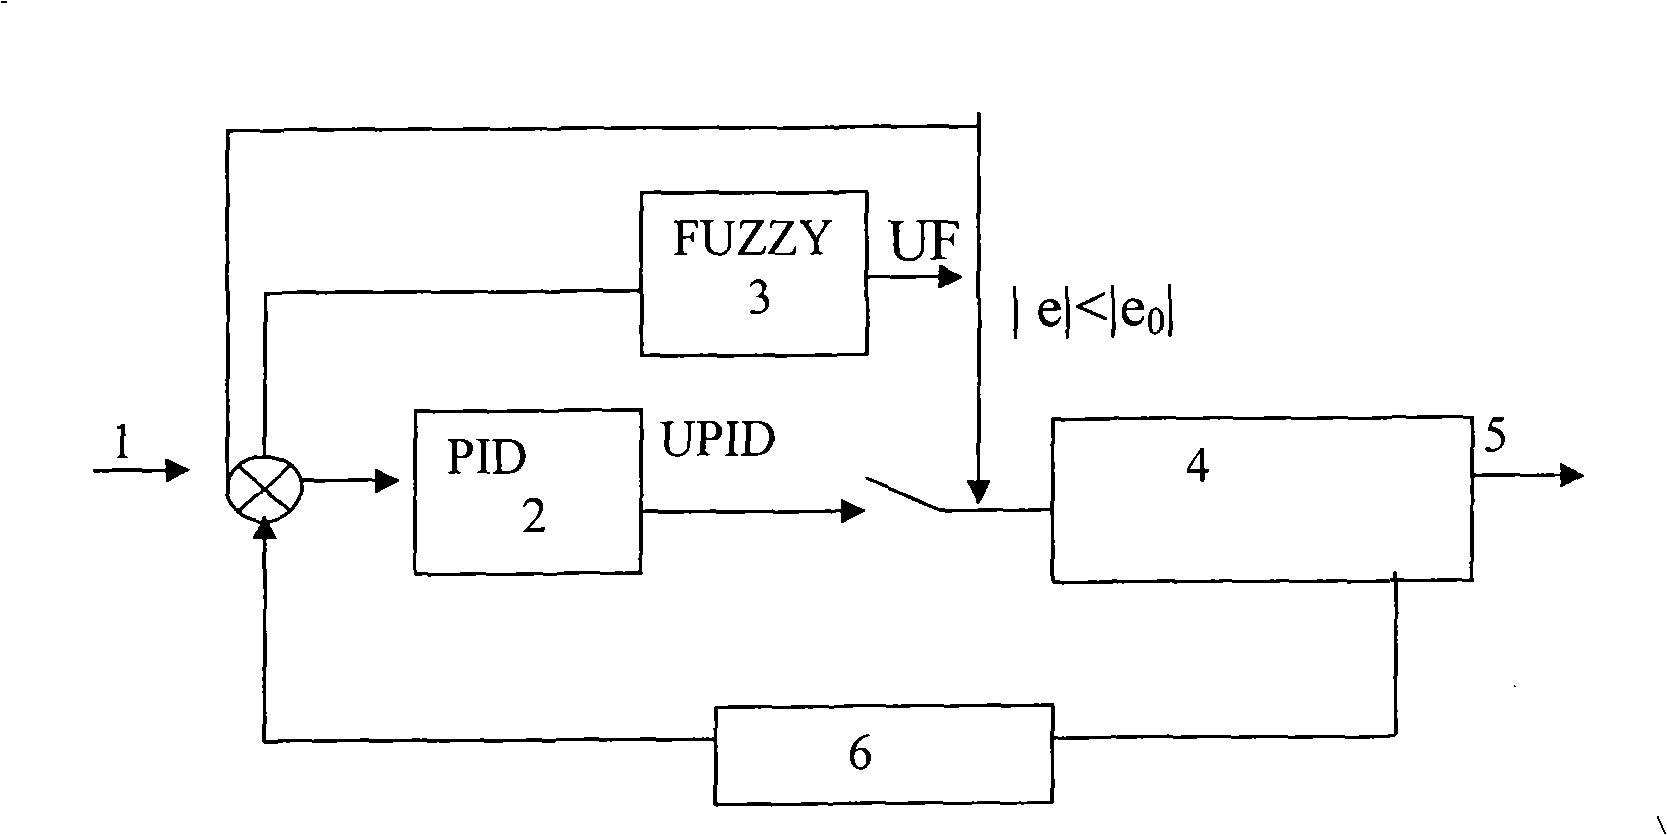 Fuzzy-PID compound control system in sintered mixing water supply